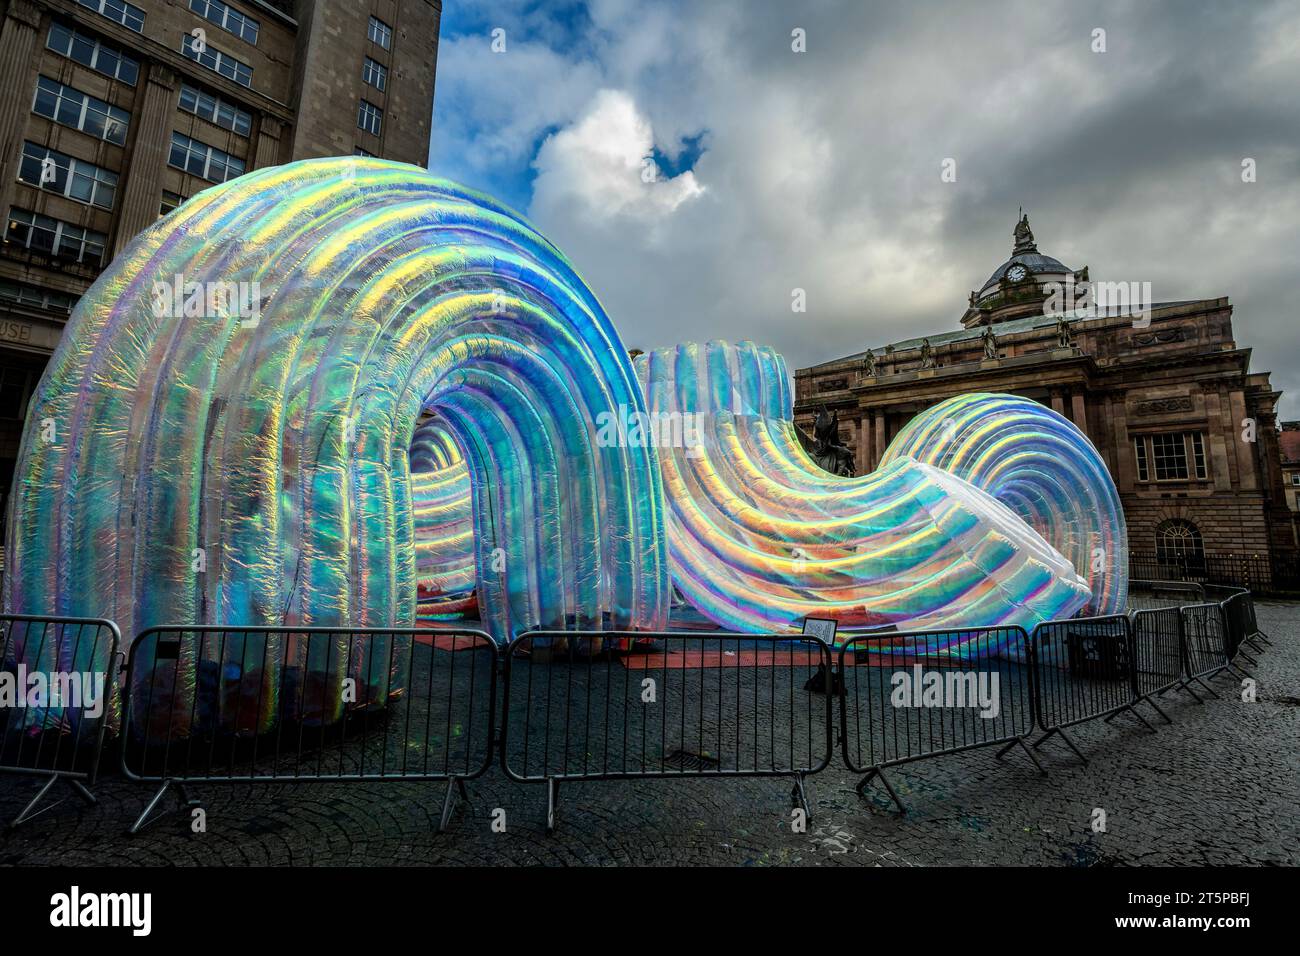 Part of the Liverpool River of Light art installation Elysian & Elysian Arcs by artist Atelier Sisu in Exchange Flags behind the town hall. Stock Photo